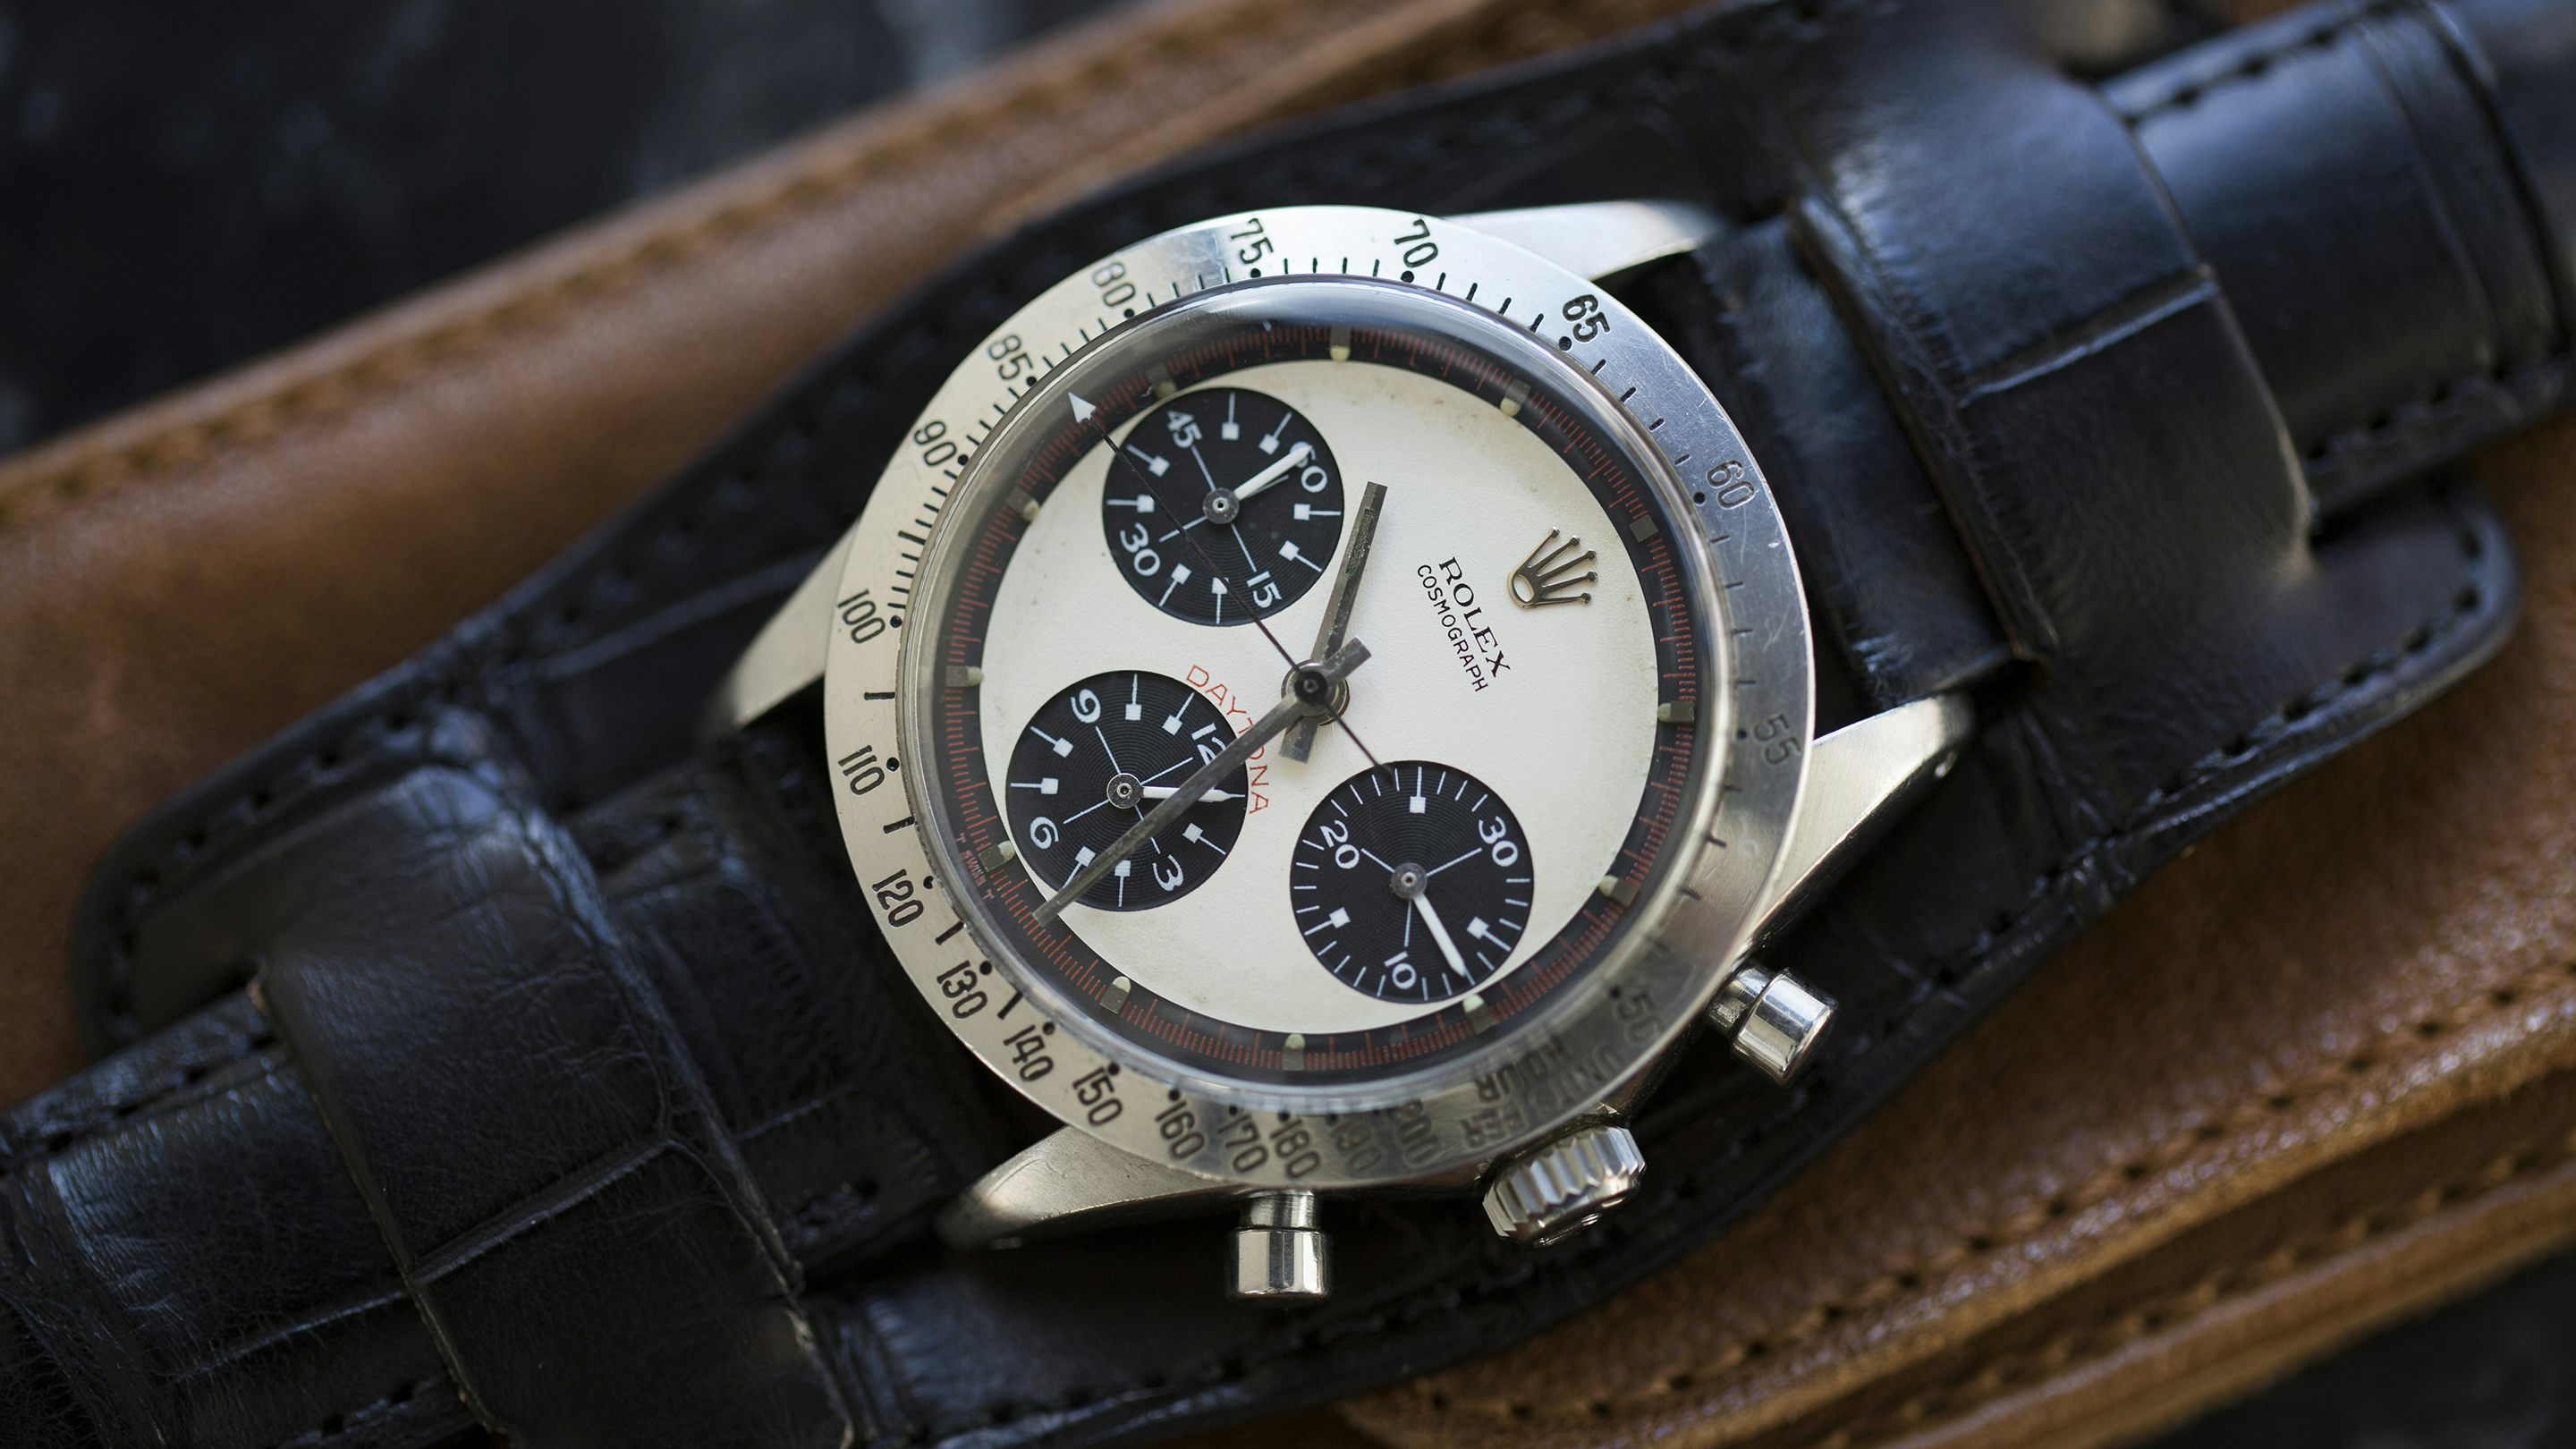 News: Paul Newman's Daytona Sells For $17,752,500, World's Most Expensive Wristwatch Ever Sold - Hodinkee